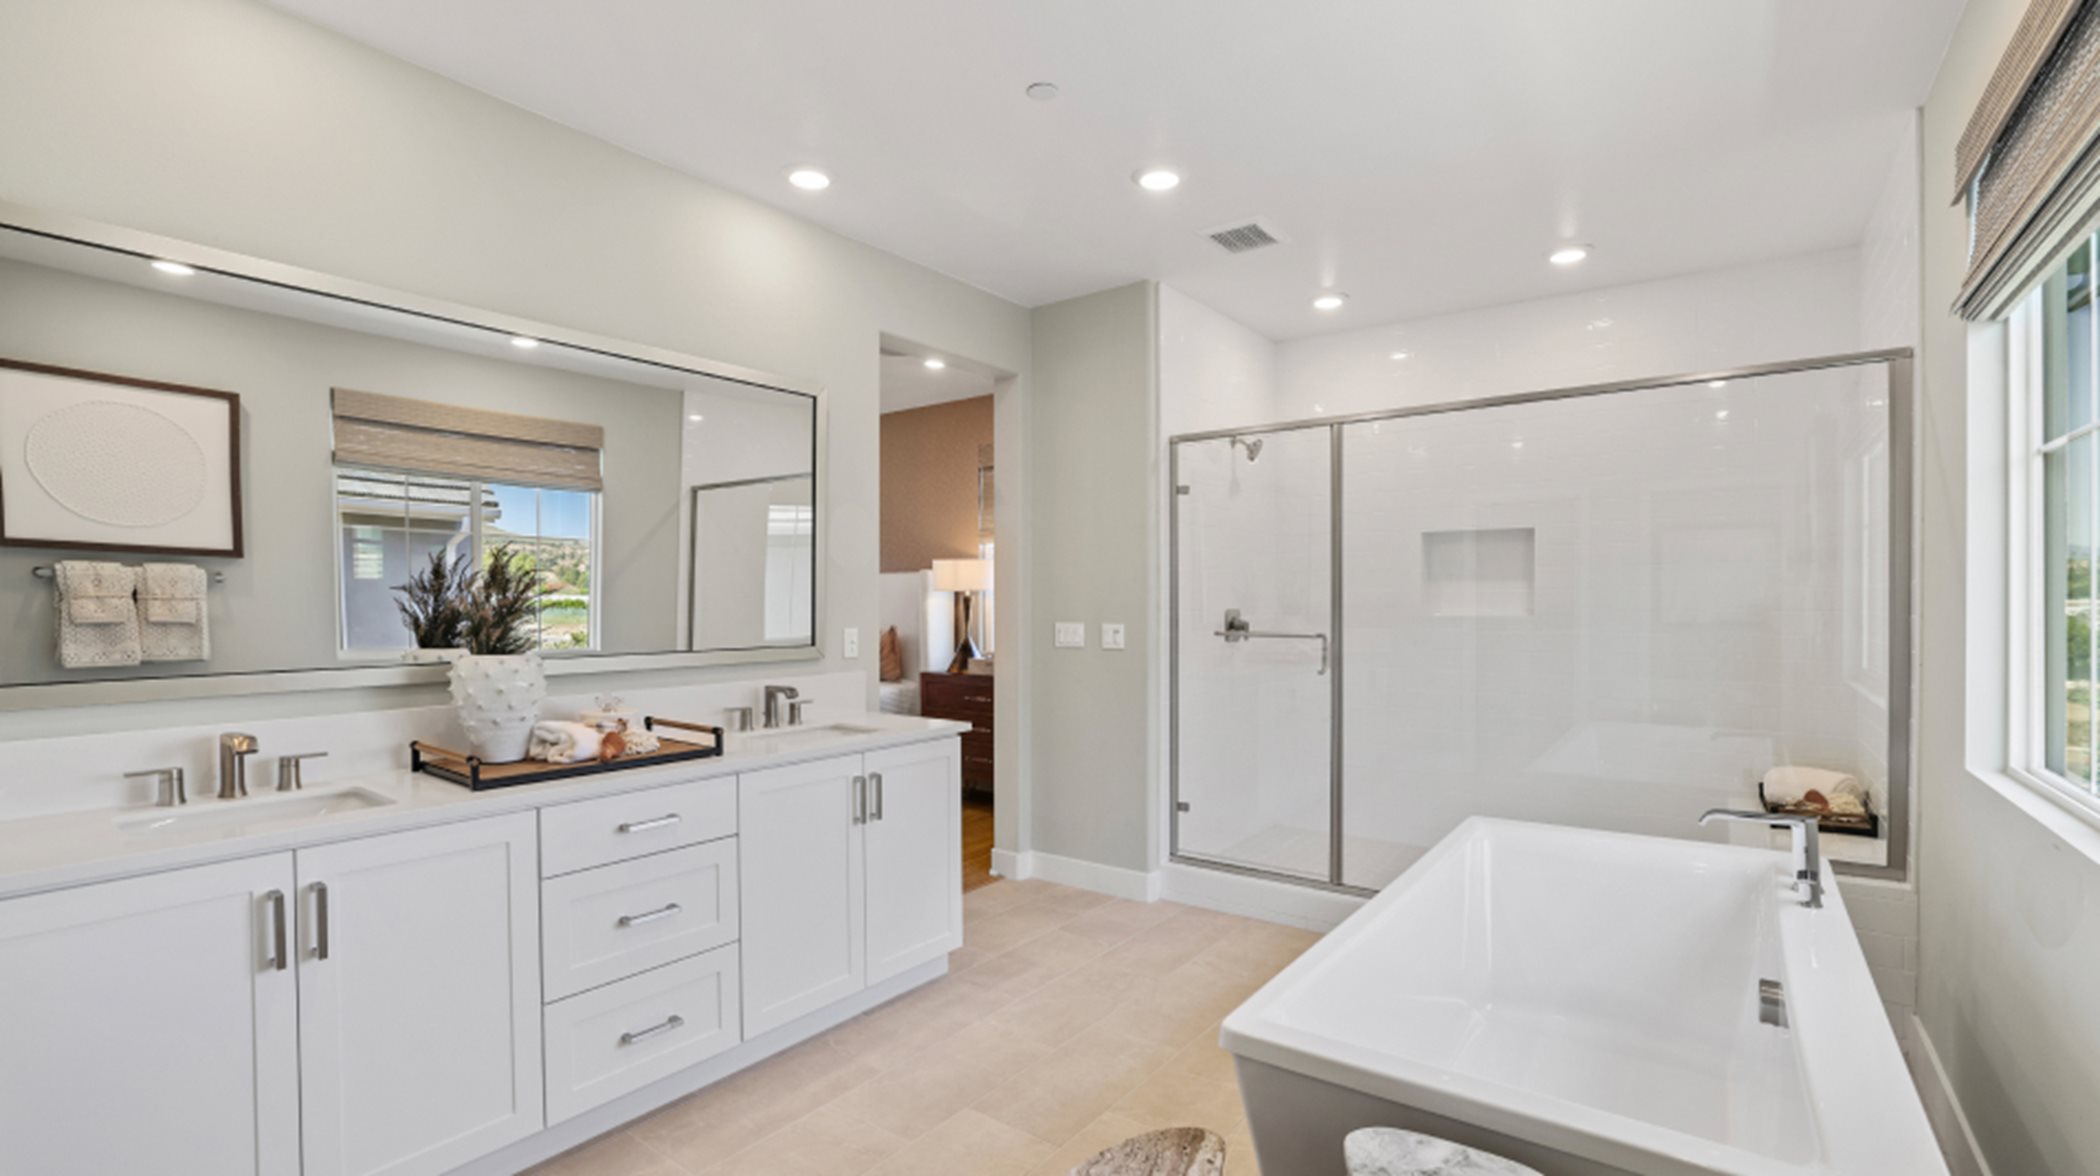 Furnished owner's suite bathroom with cabinetry, bath and shower